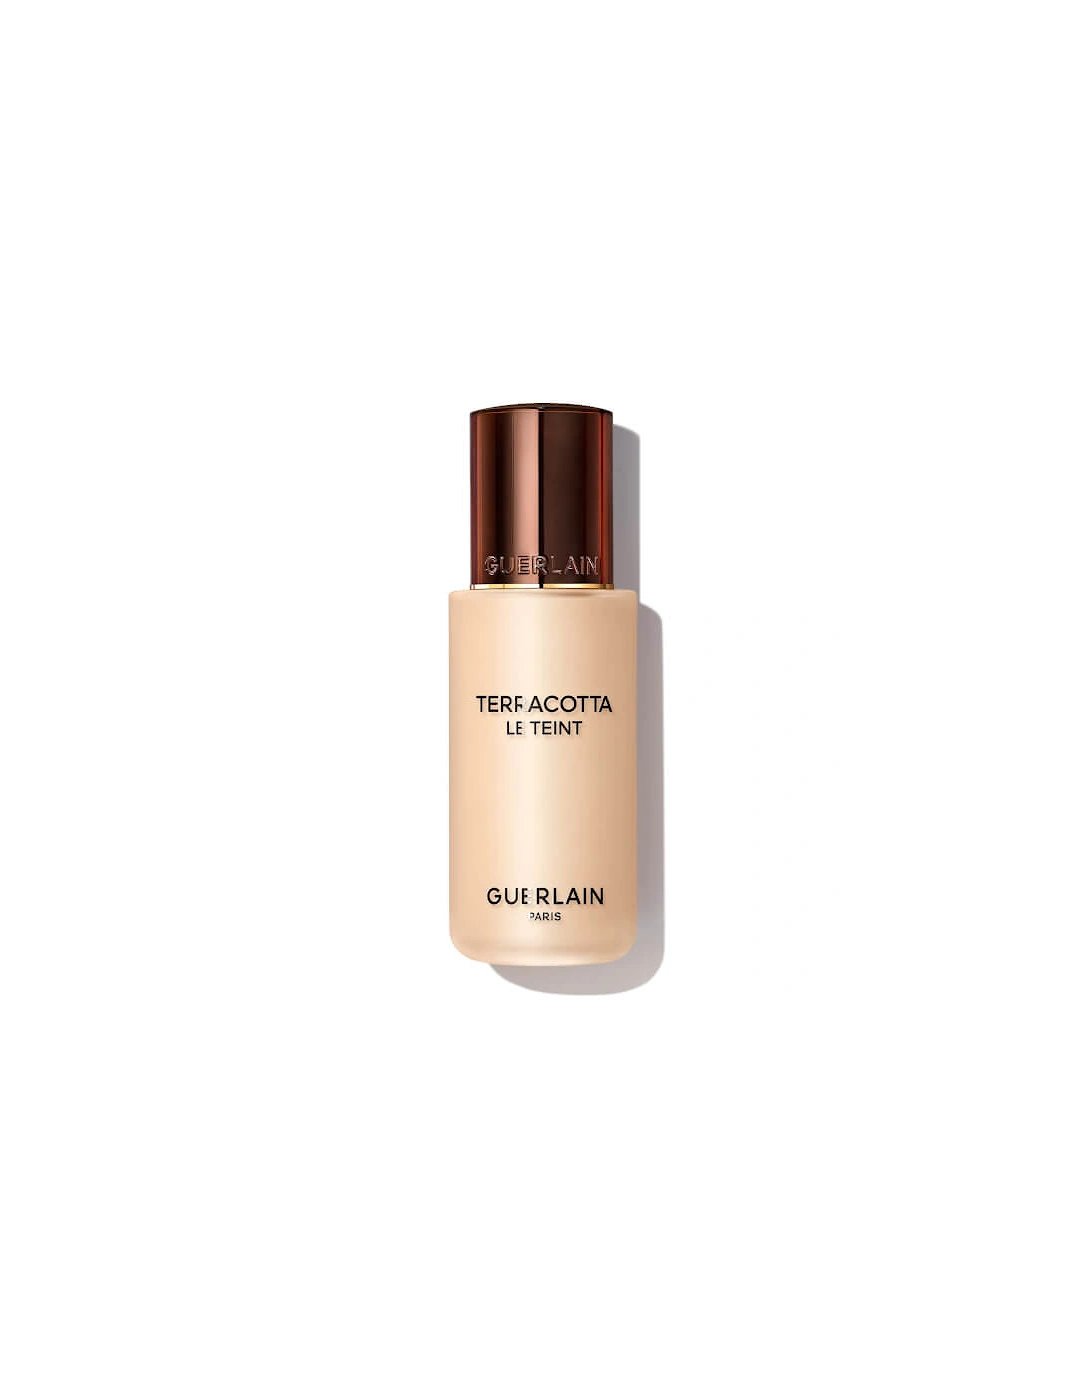 Terracotta Le Teint Healthy Glow Natural Perfection Foundation - 0.5W, 2 of 1